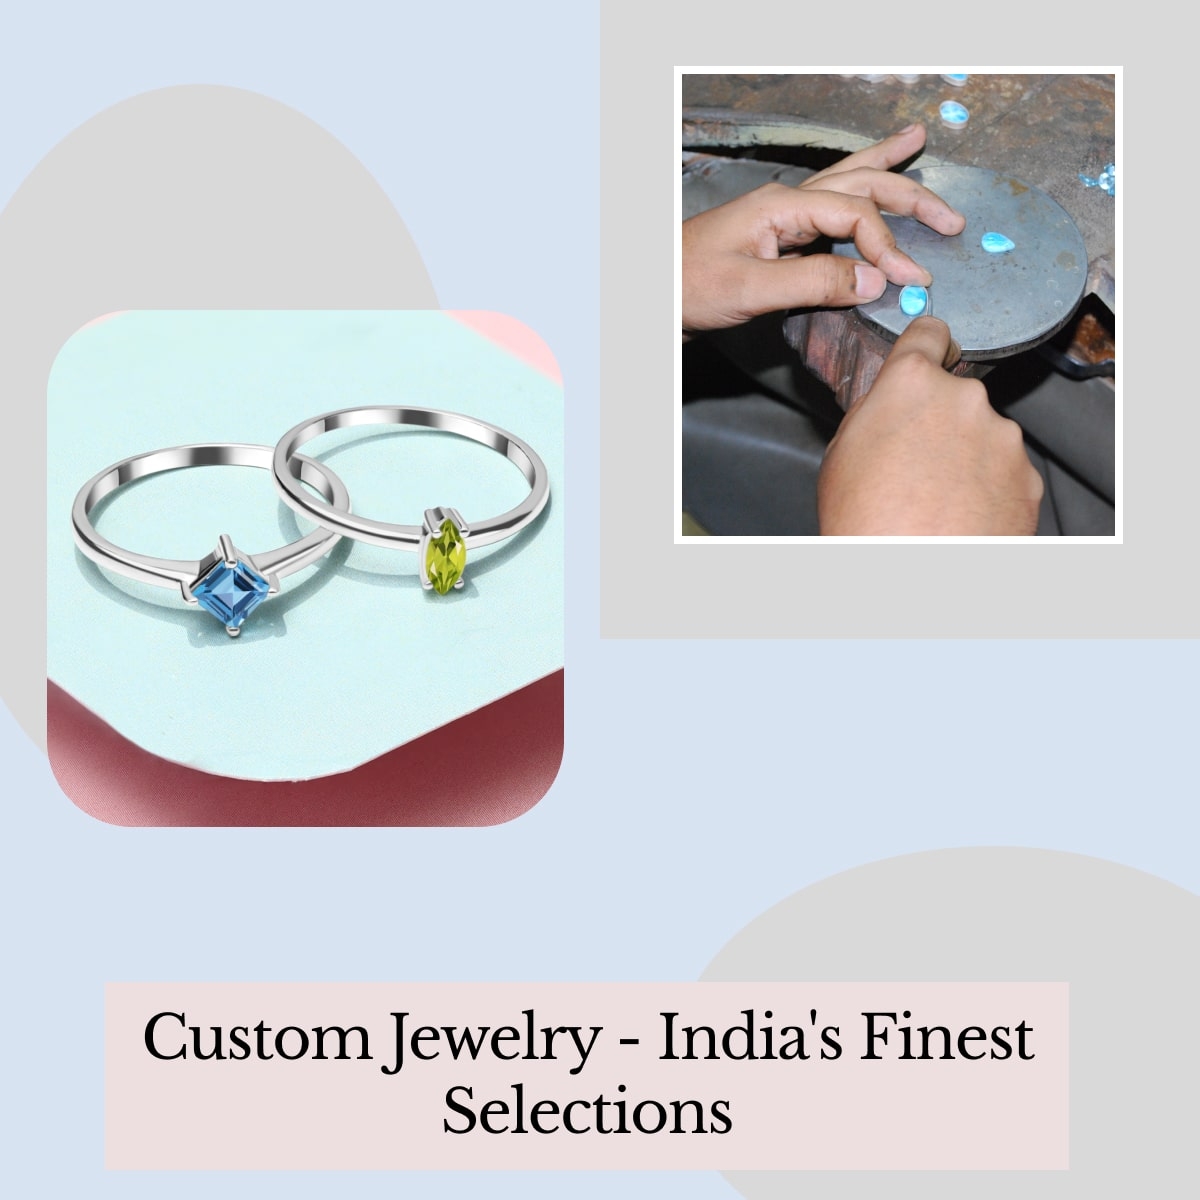 Approach To Select the Best Place For Custom Jewelry In India